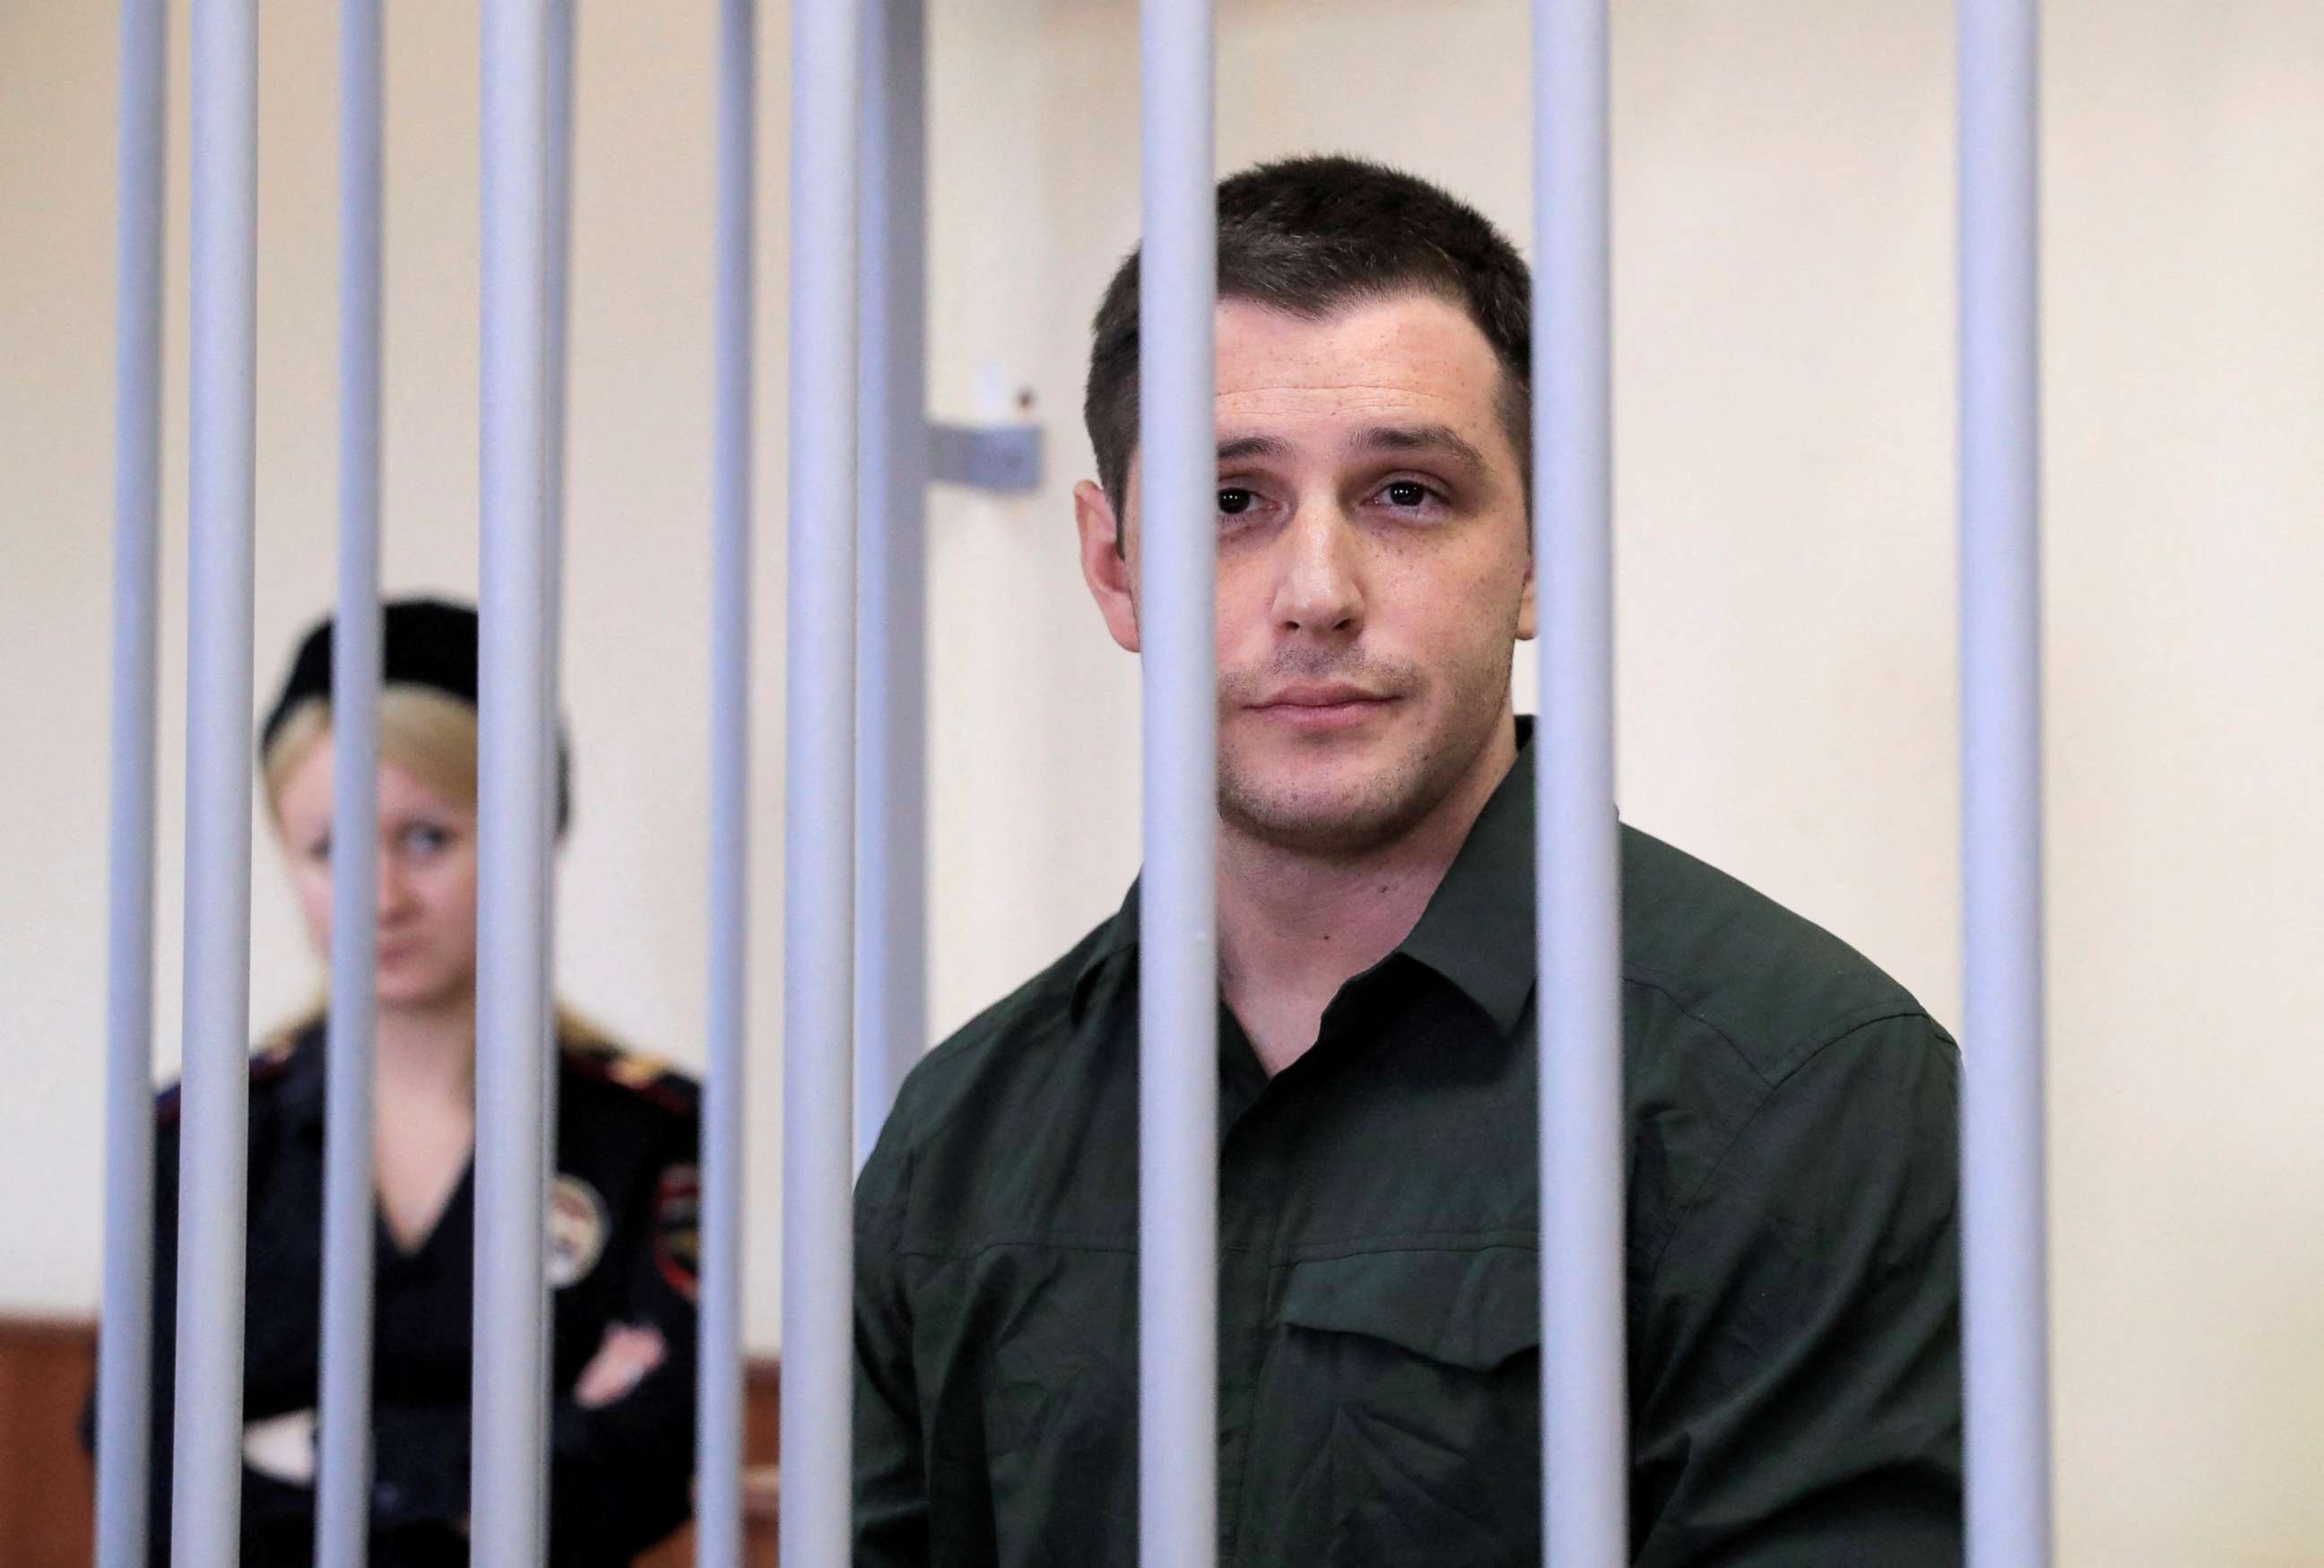 PHOTO: Former U.S. Marine Trevor Reed, who was detained in 2019 and accused of assaulting police officers, stands inside a defendants' cage during a court hearing in Moscow, March 11, 2020.